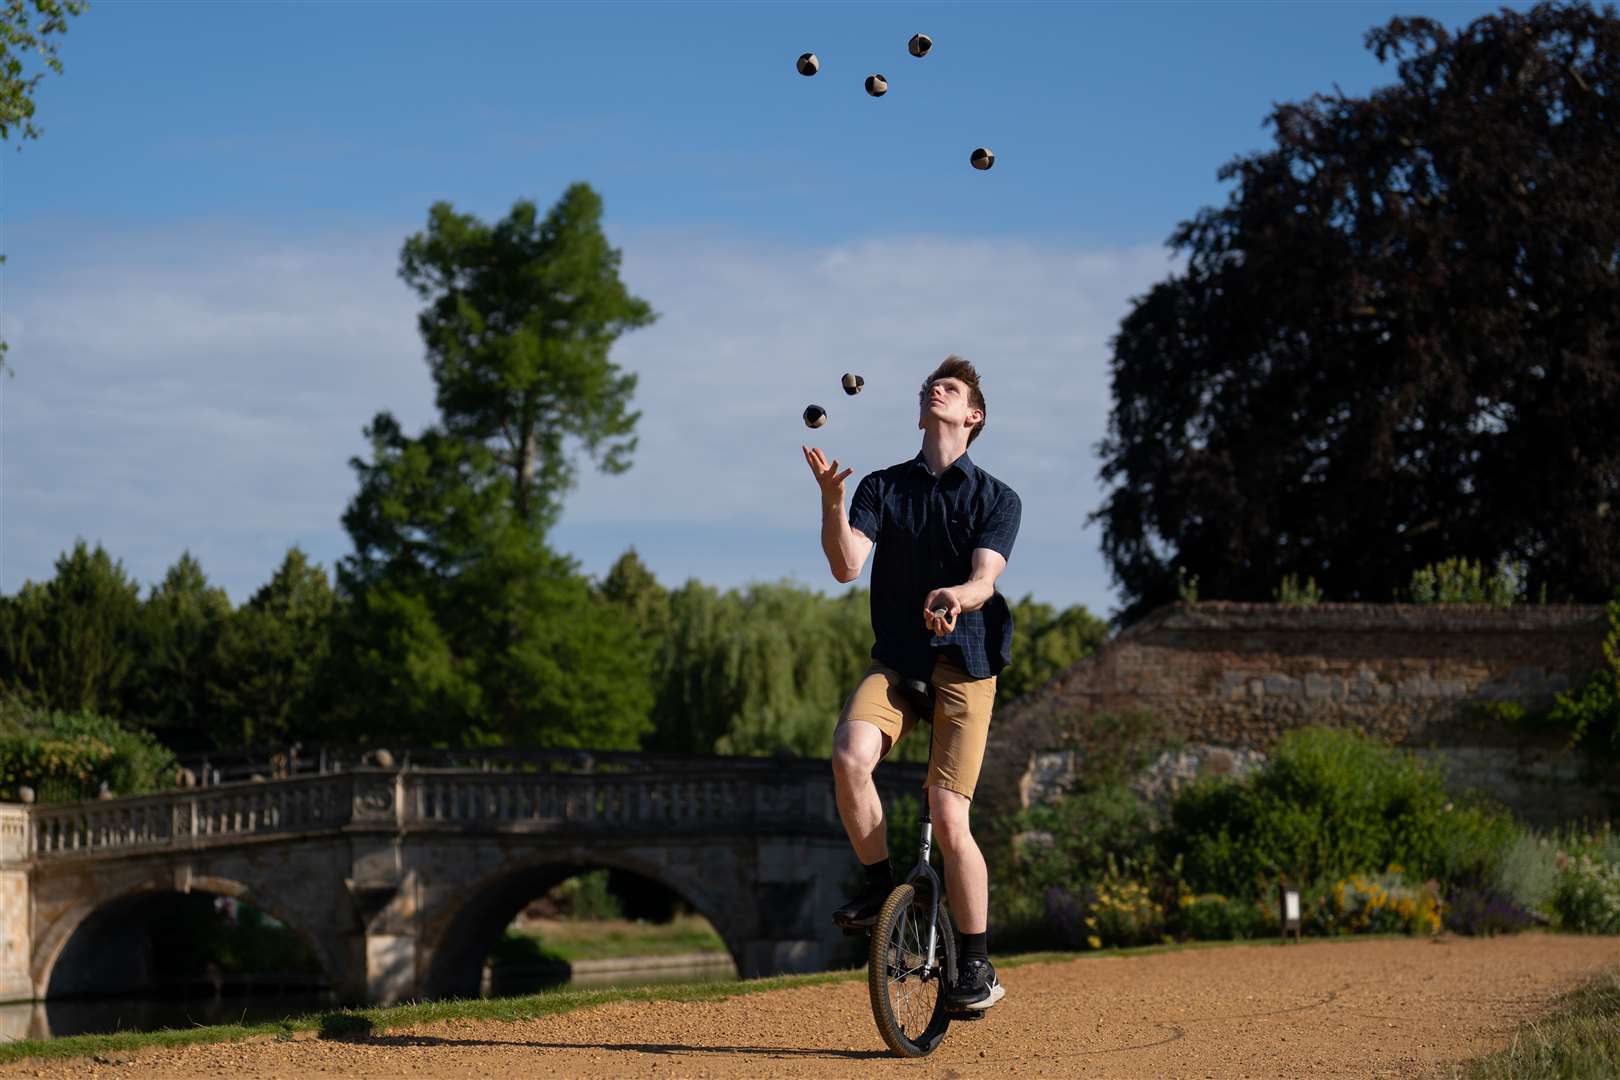 Cambridge University PhD student James Cozens juggling seven balls whilst unicycling around King’s College in Cambridge, having honed his skills with performance analysis software that he developed himself (Joe Giddens/PA)